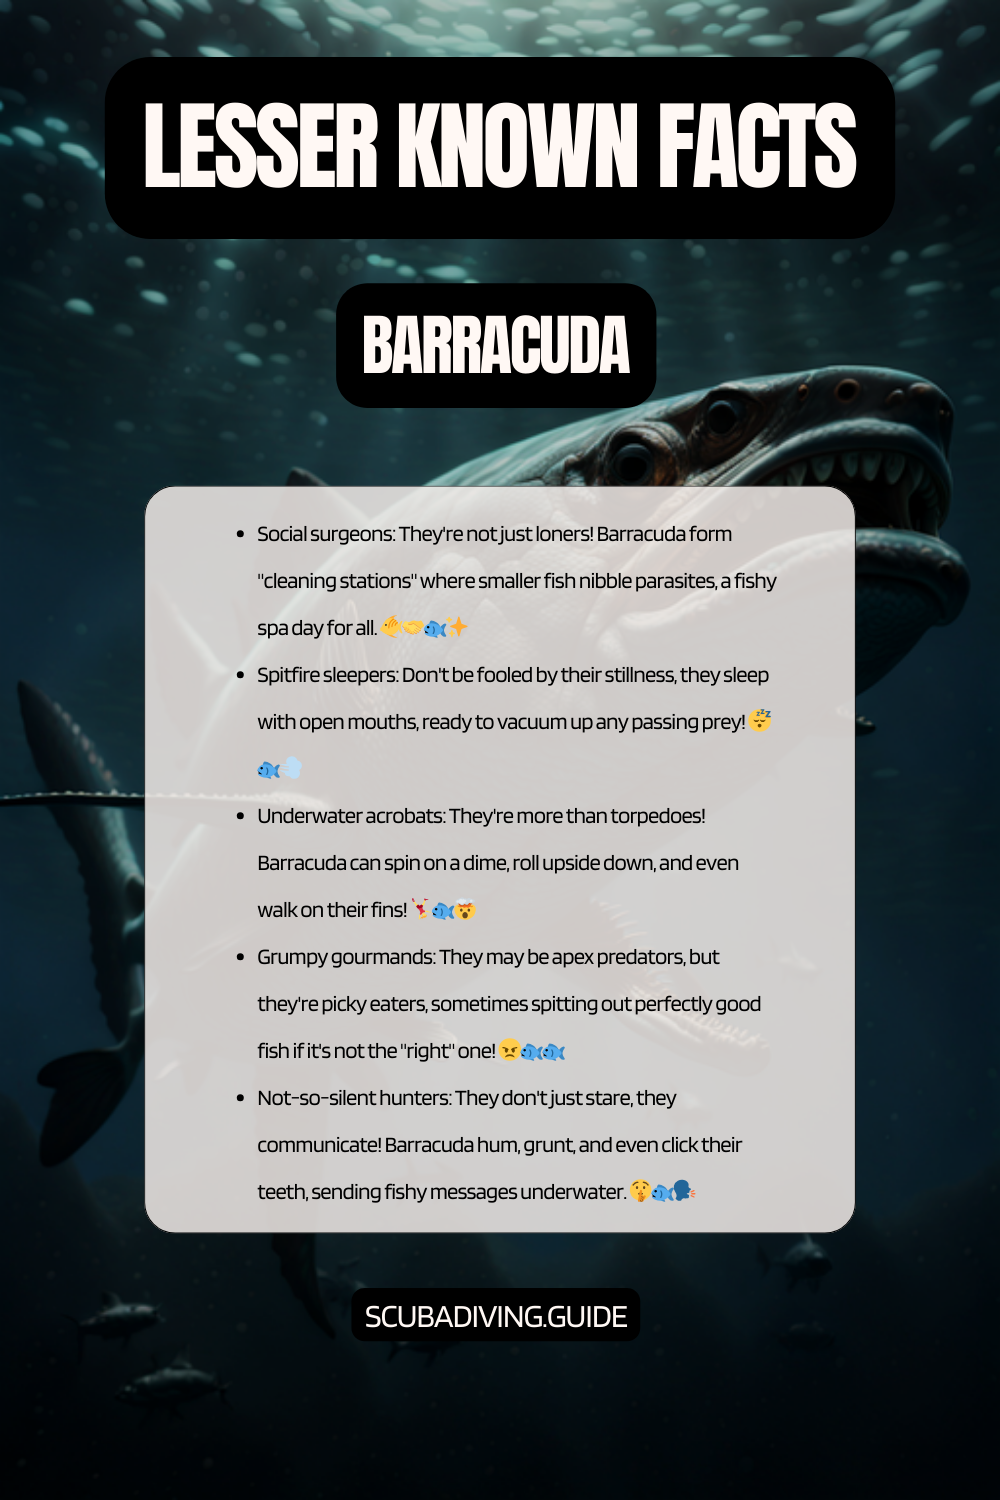 lesser known facts - barracuda